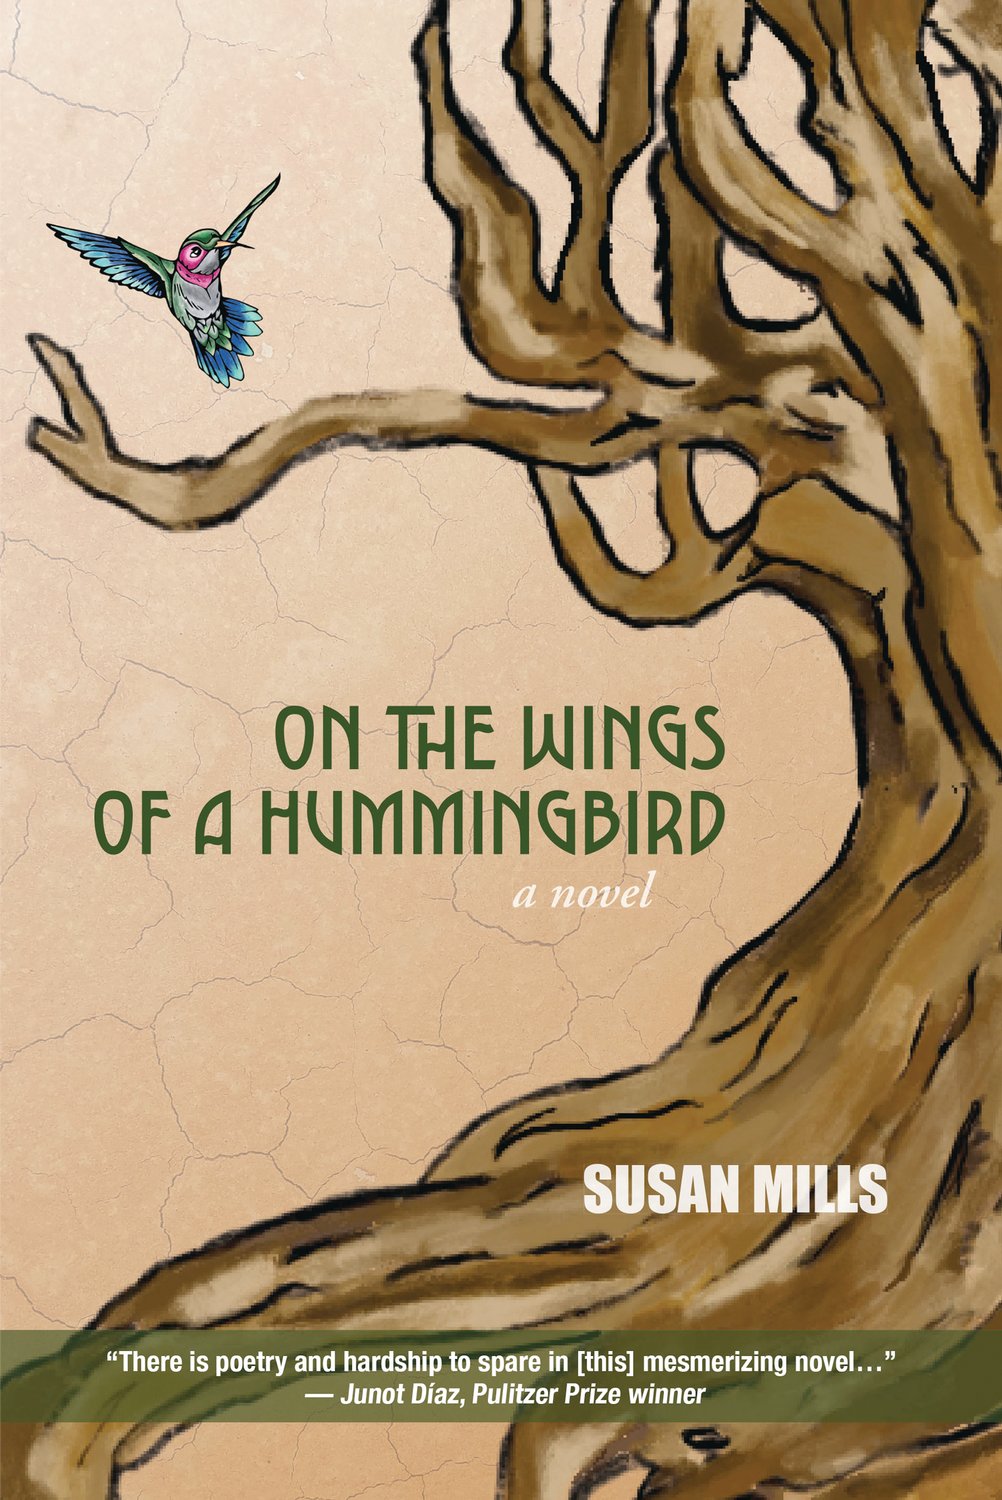 “On the Wings of a Hummingbird” is available at Providence’s Books on the Square, Amazon, Barnes and Noble or bookshop.org.